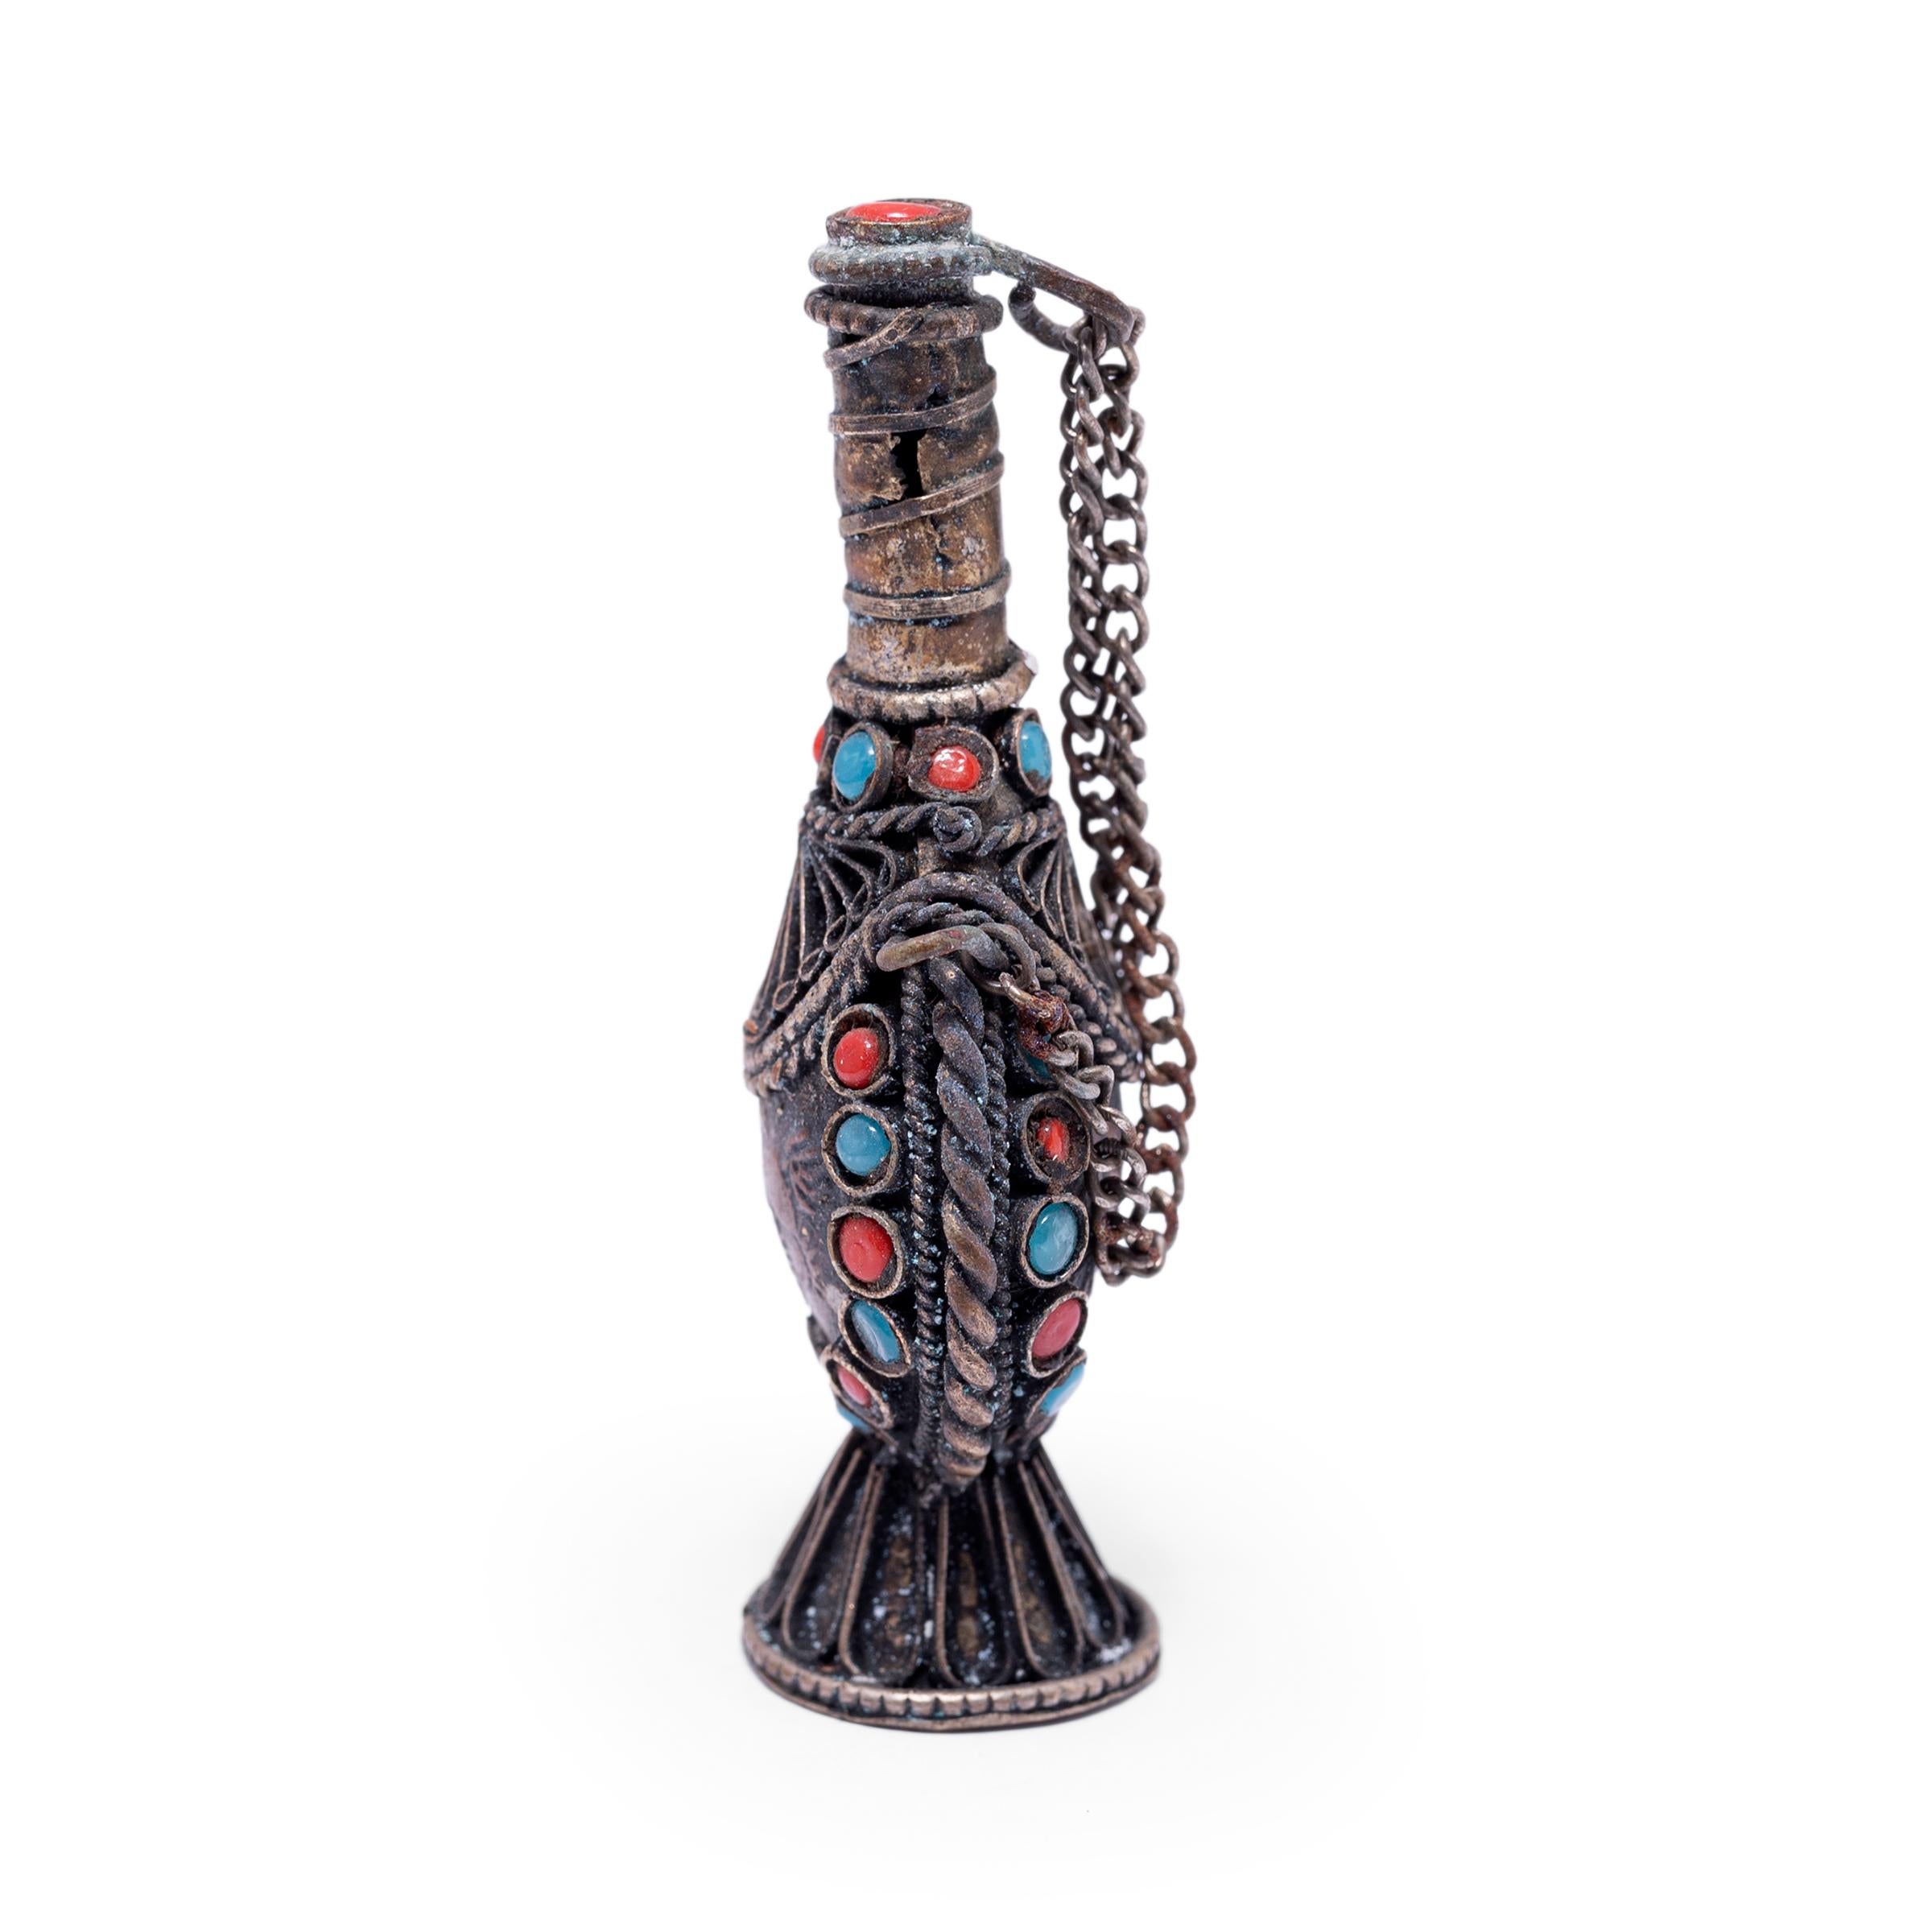 This early 20th century Tibetan snuff bottle is delightfully ornate, crafted with silver metalwork and encrusted with colorful beads. The small bottle has a teardrop shape with a footed base and a long, slender neck. The lid is adorned with a red